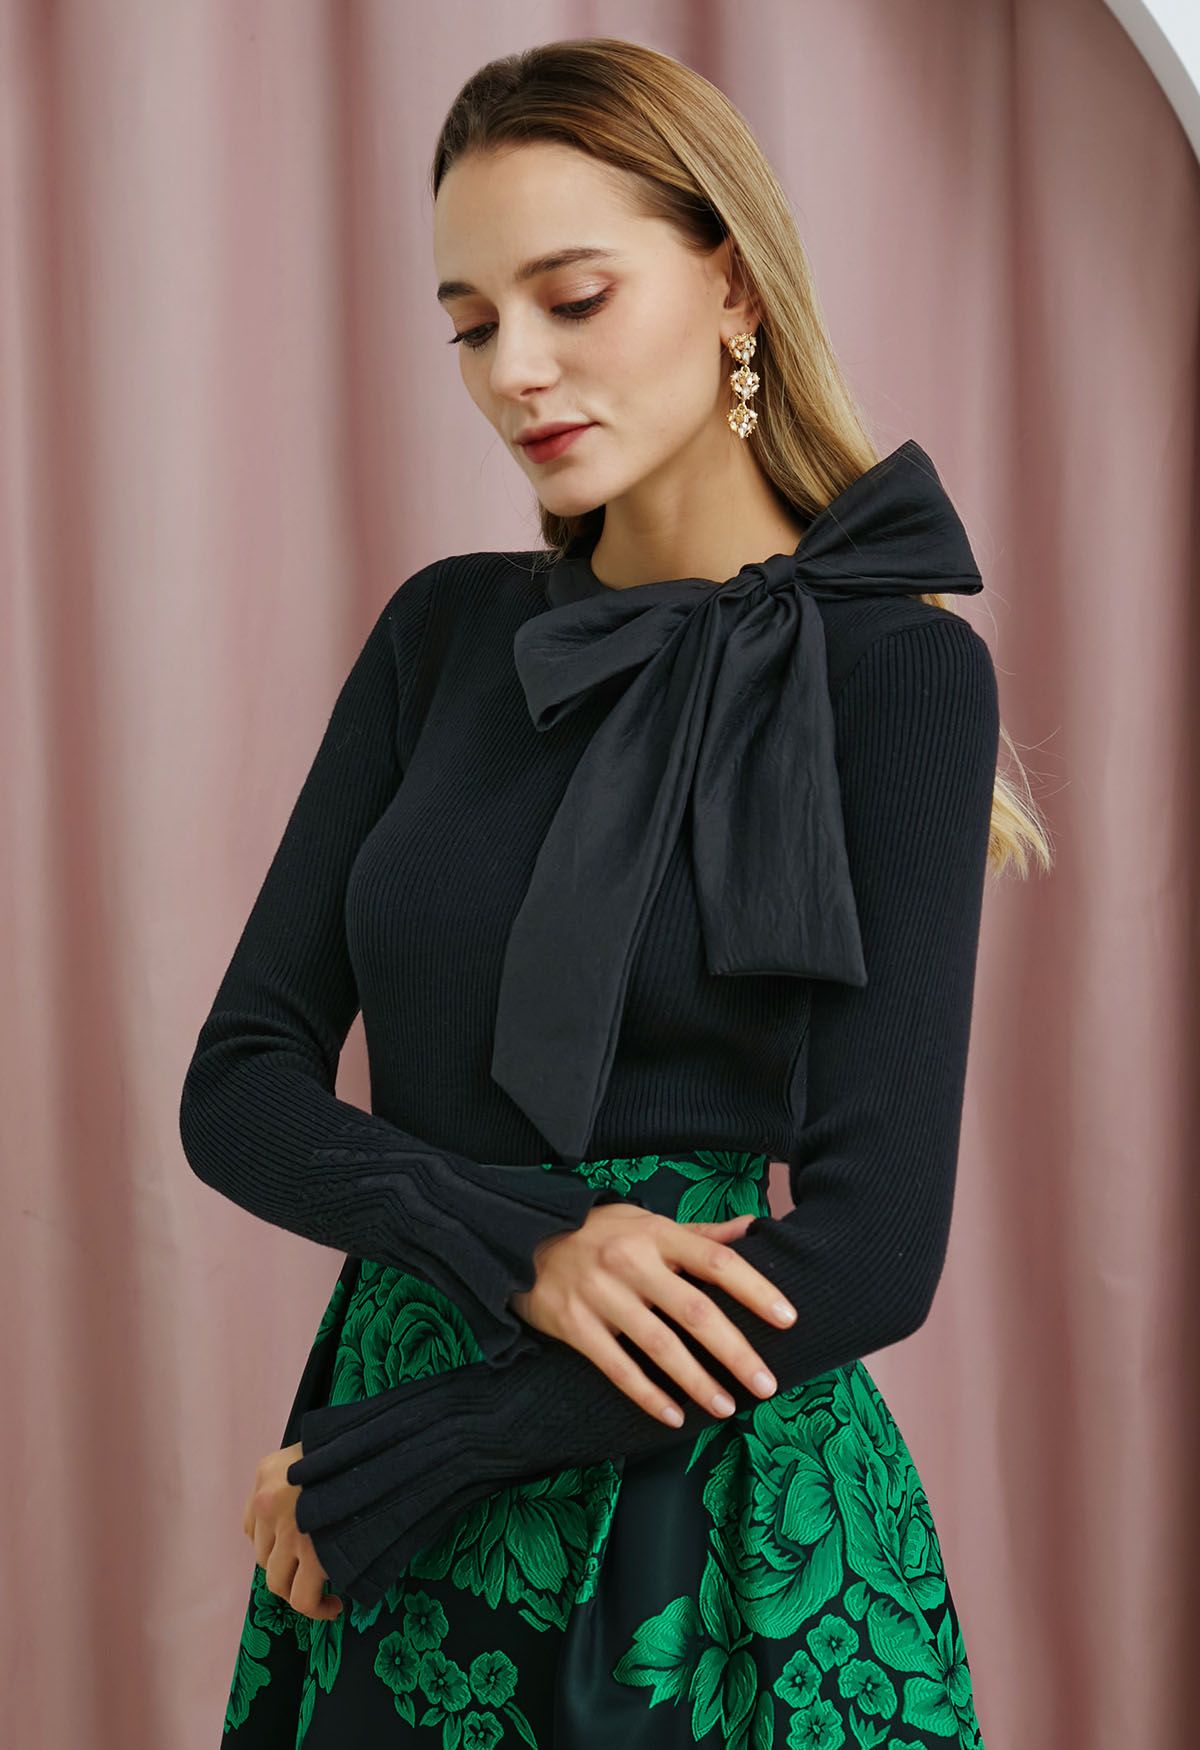 Fancy with Bowknot Knit Top in Black